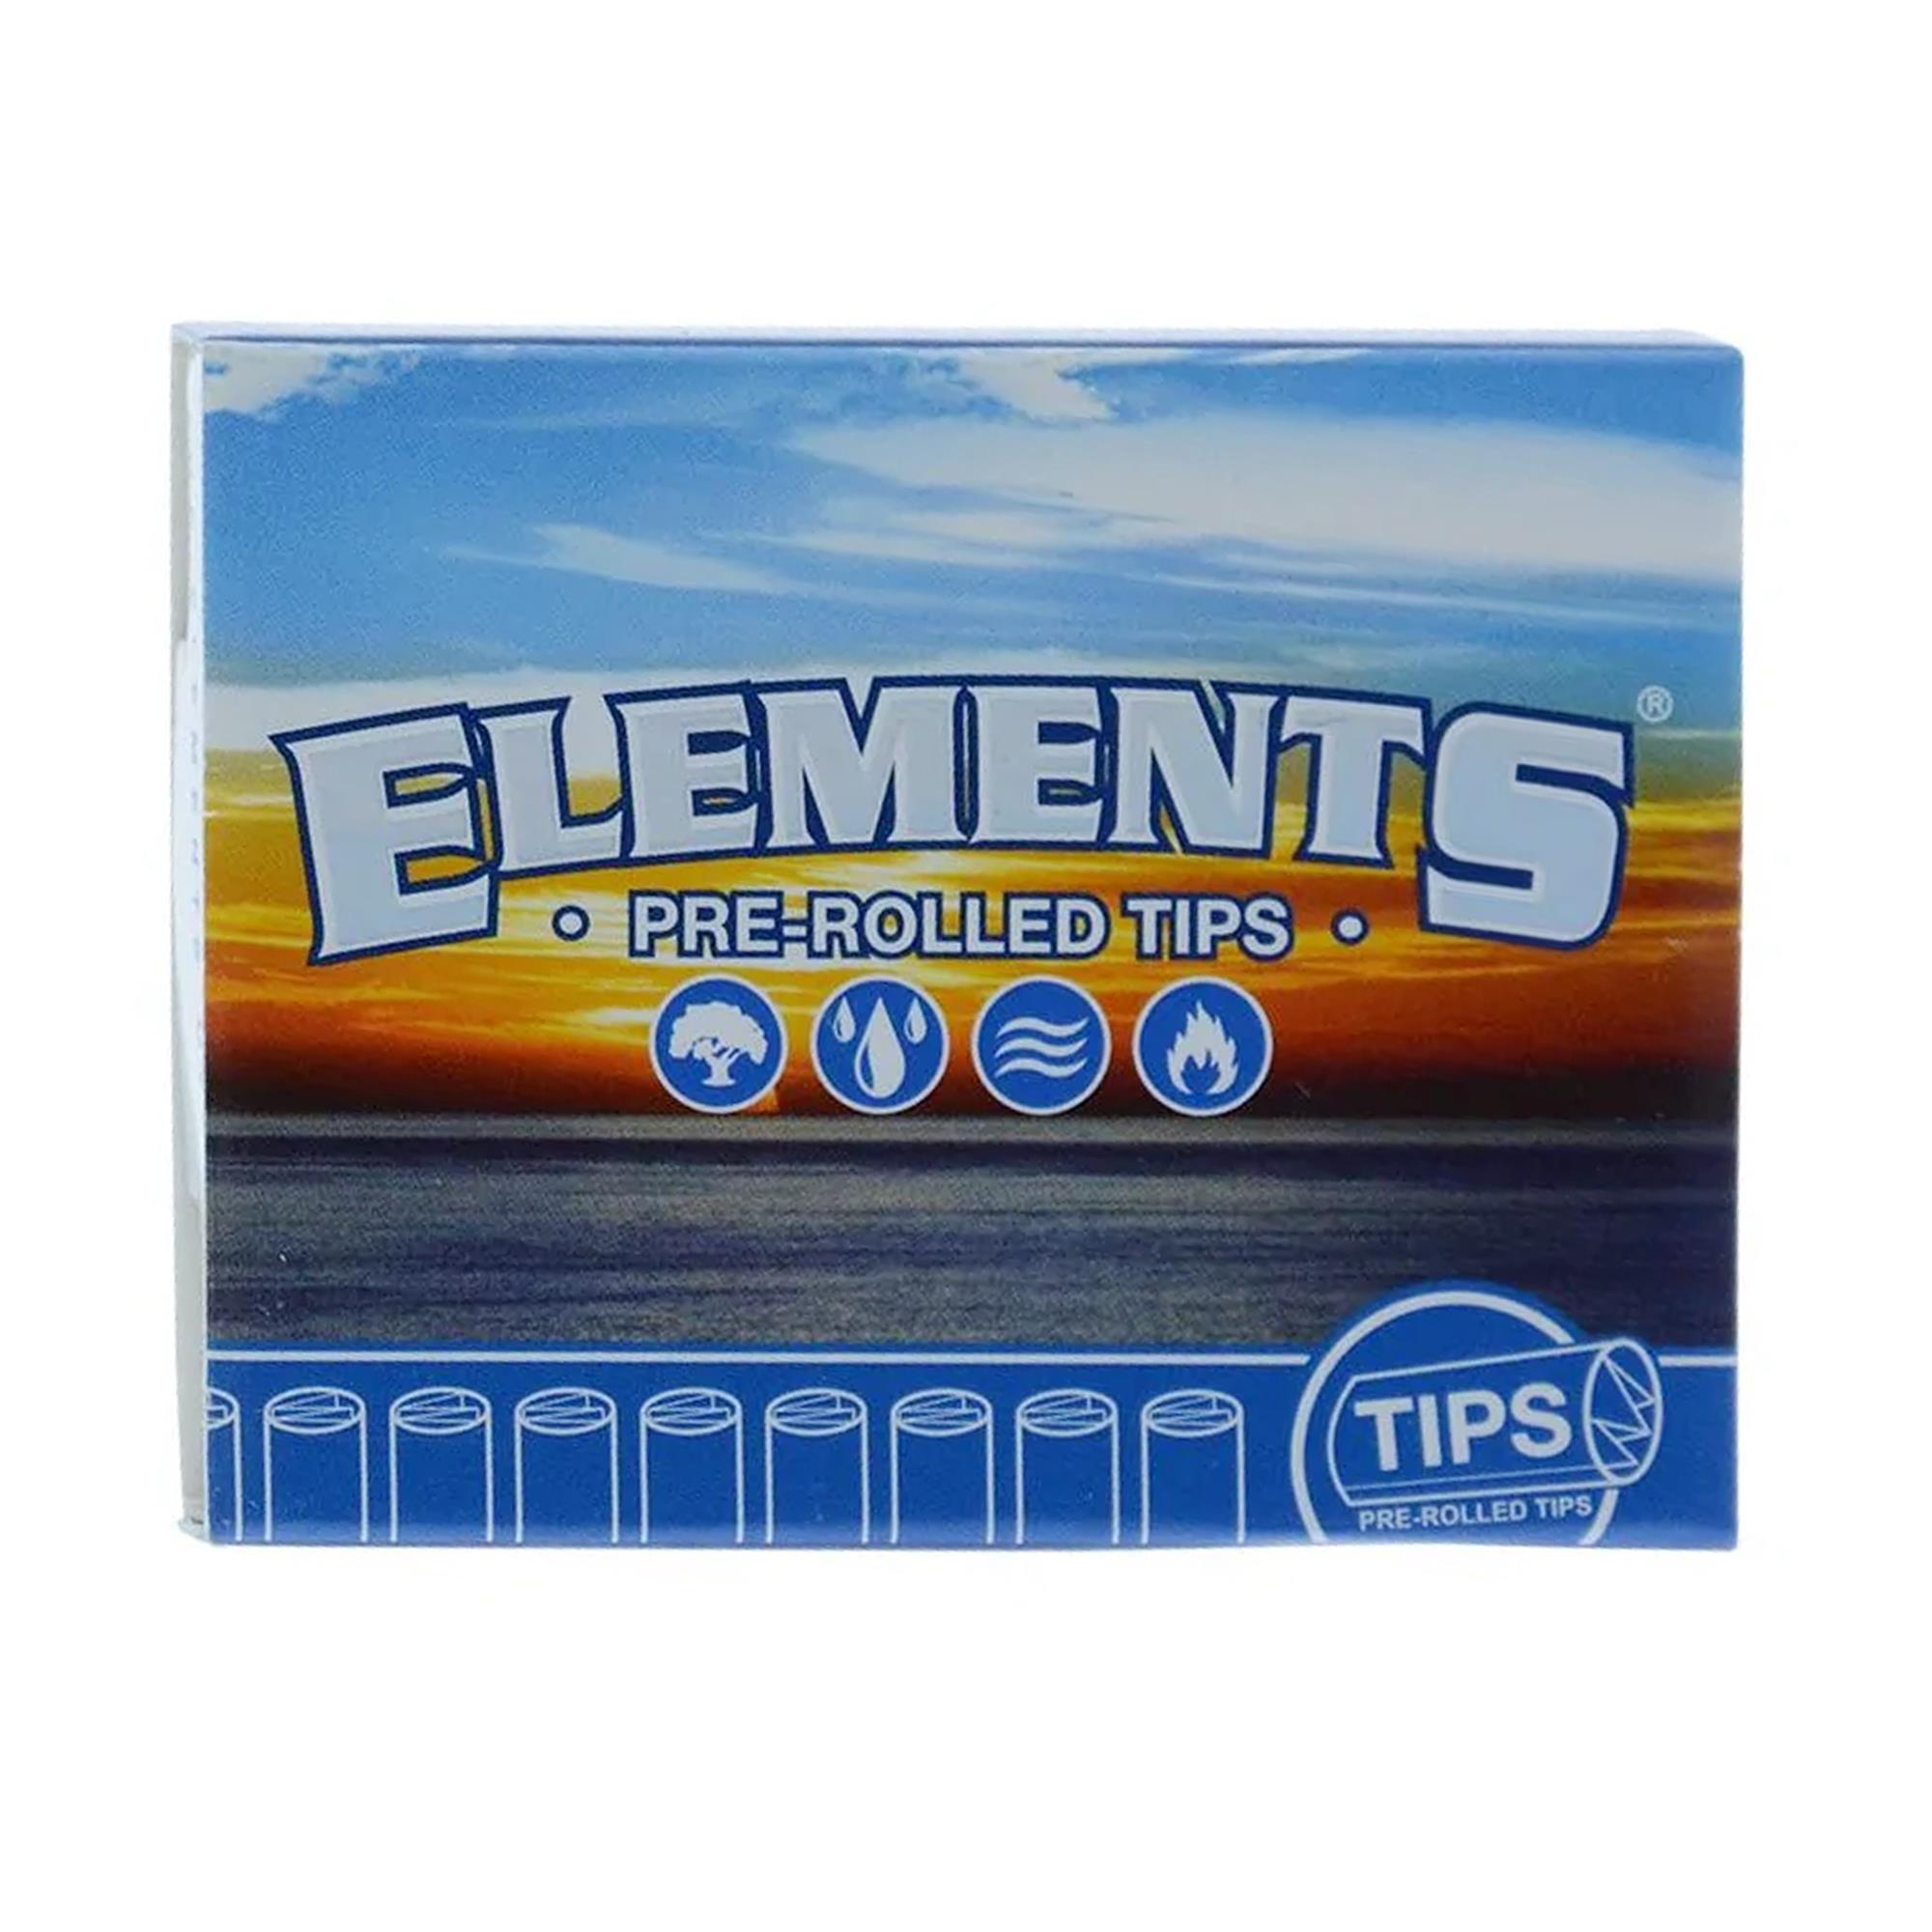 ELEMENTS TIPS PRE-ROLLED